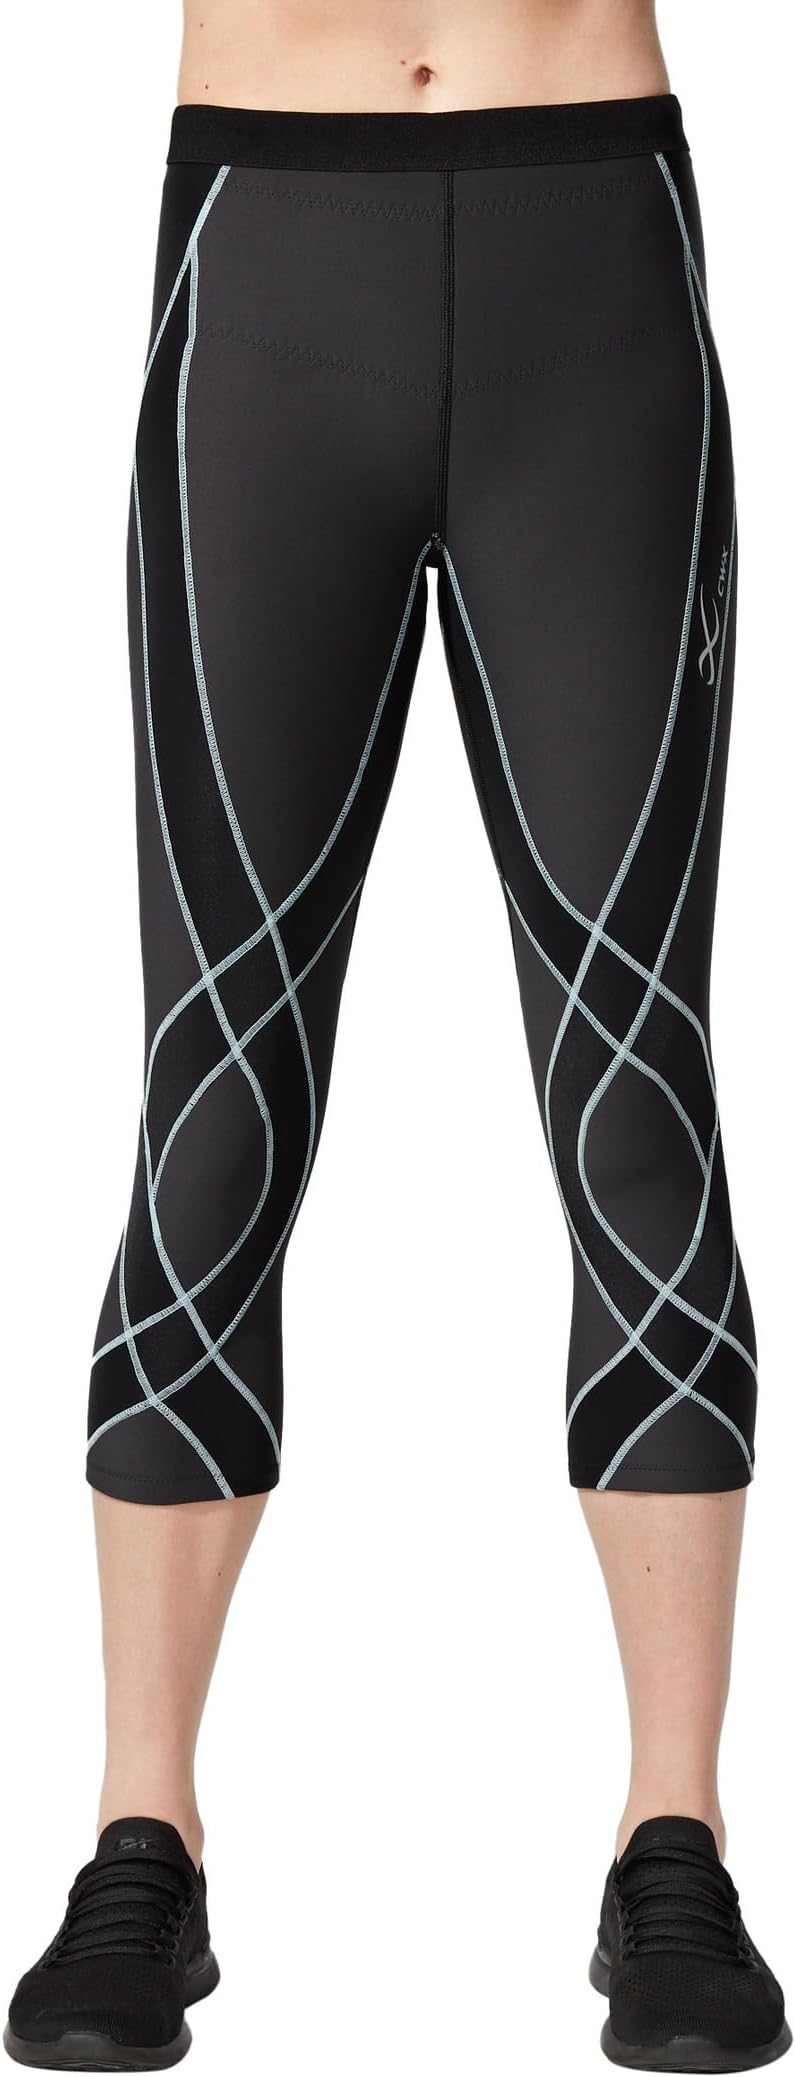 Брюки Endurance Generator Insulator Joint & Muscle Support 3/4 Compression Tights CW-X, цвет Black/Gray Sky